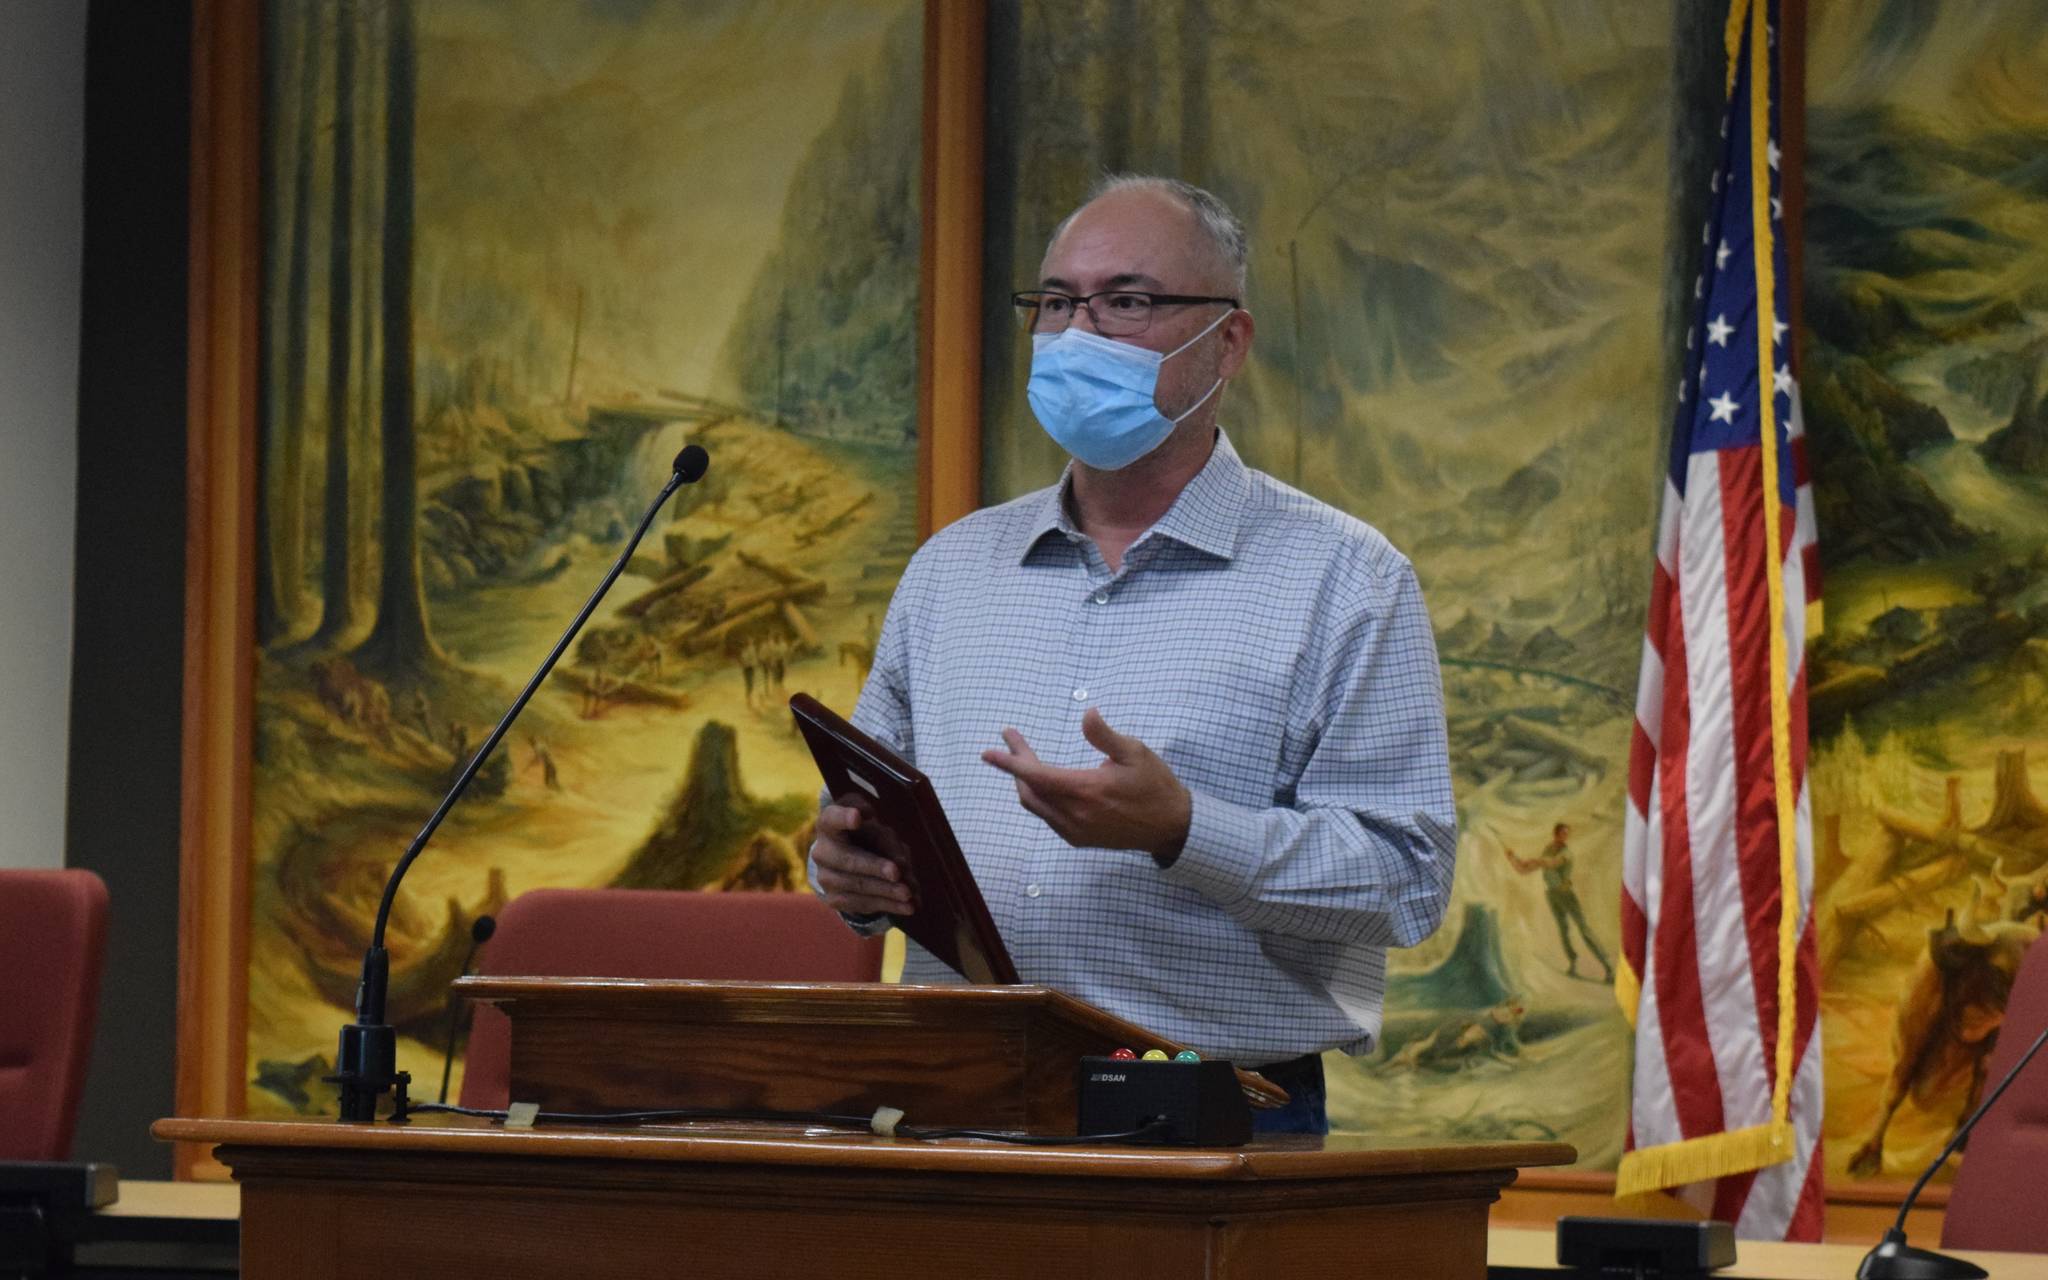 Photo by Conor Wilson/Valley Record
SnoValley Chamber President, Earl Bell, speaks at the Aug. 9 Snoqualmie city council meeting, after receiving a community service award from the city.